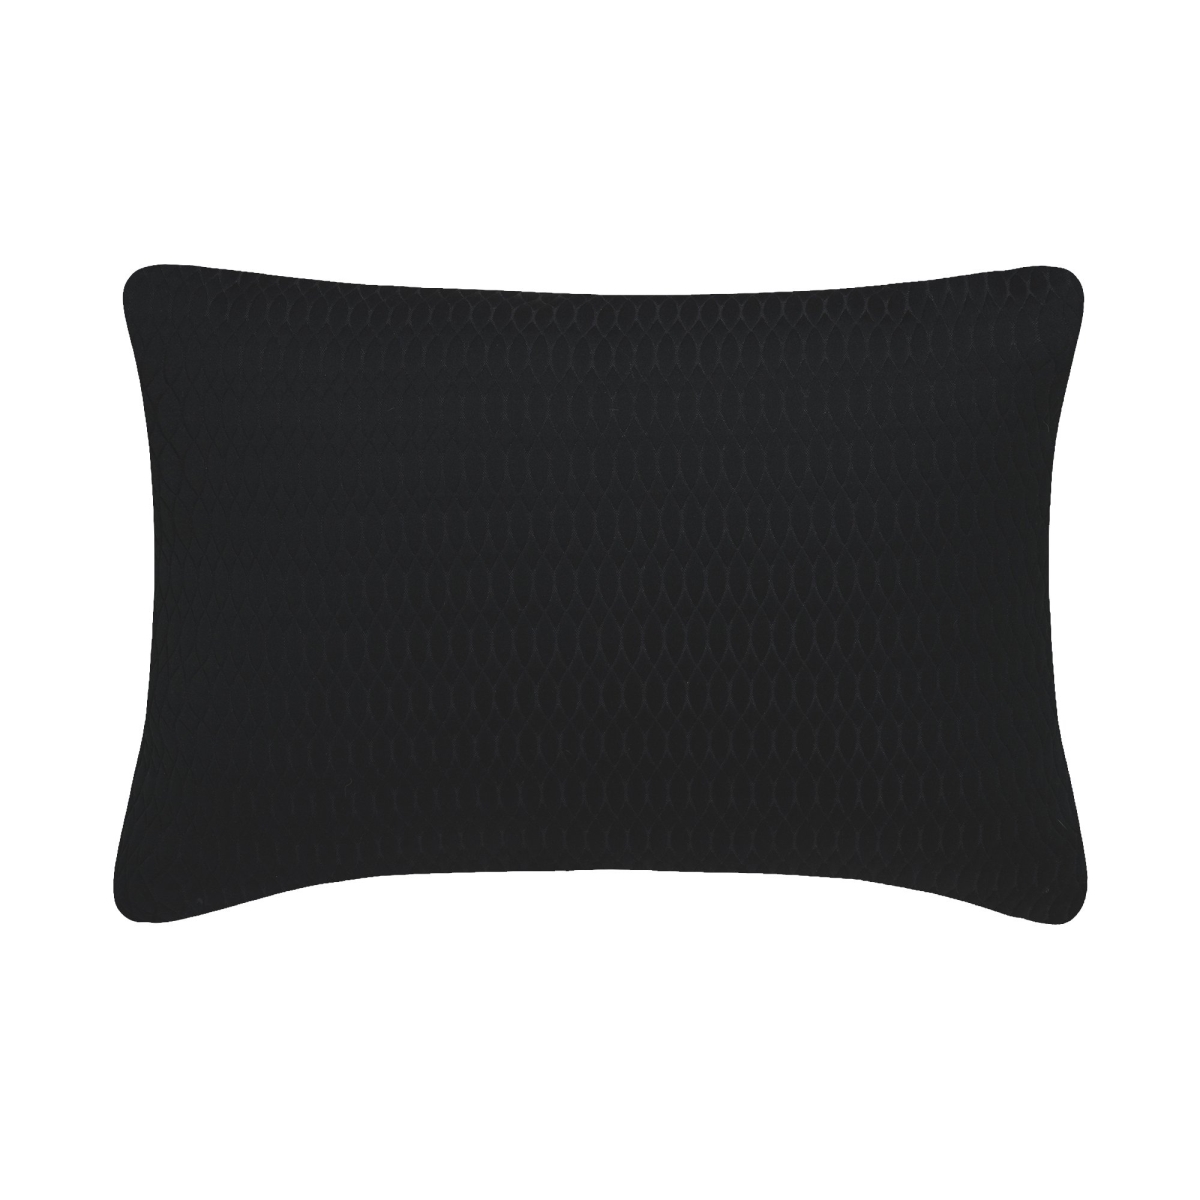 14 X 18 In. Biscay Boudoir Cushion Cover - Onyx